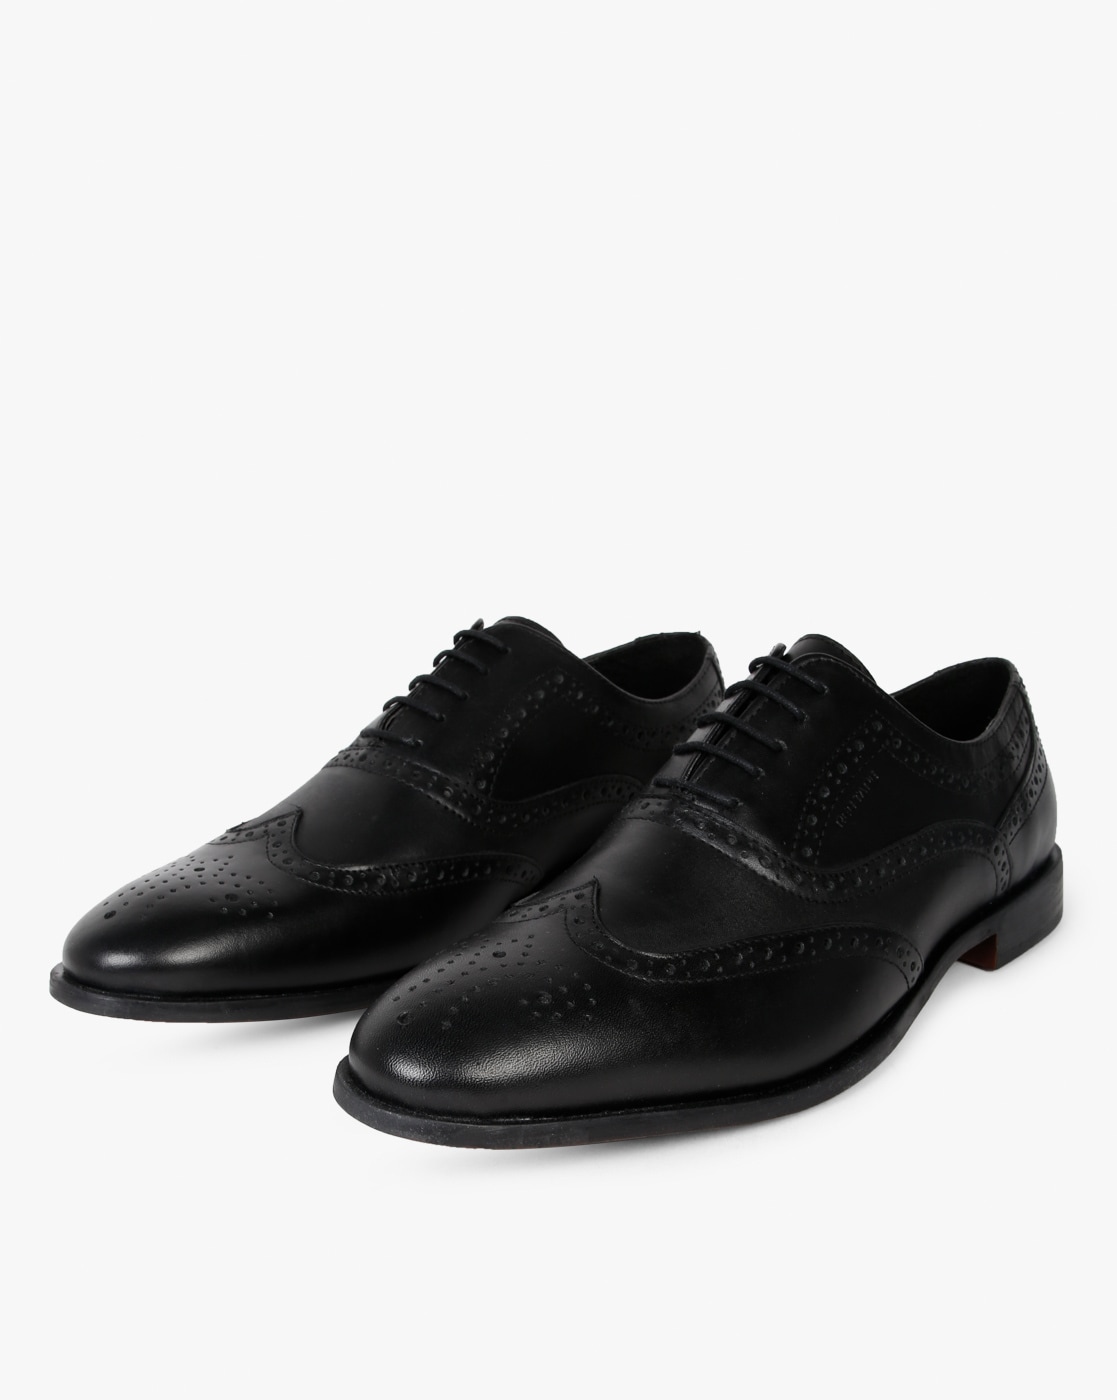 Black Formal Shoes for Men by RED TAPE 